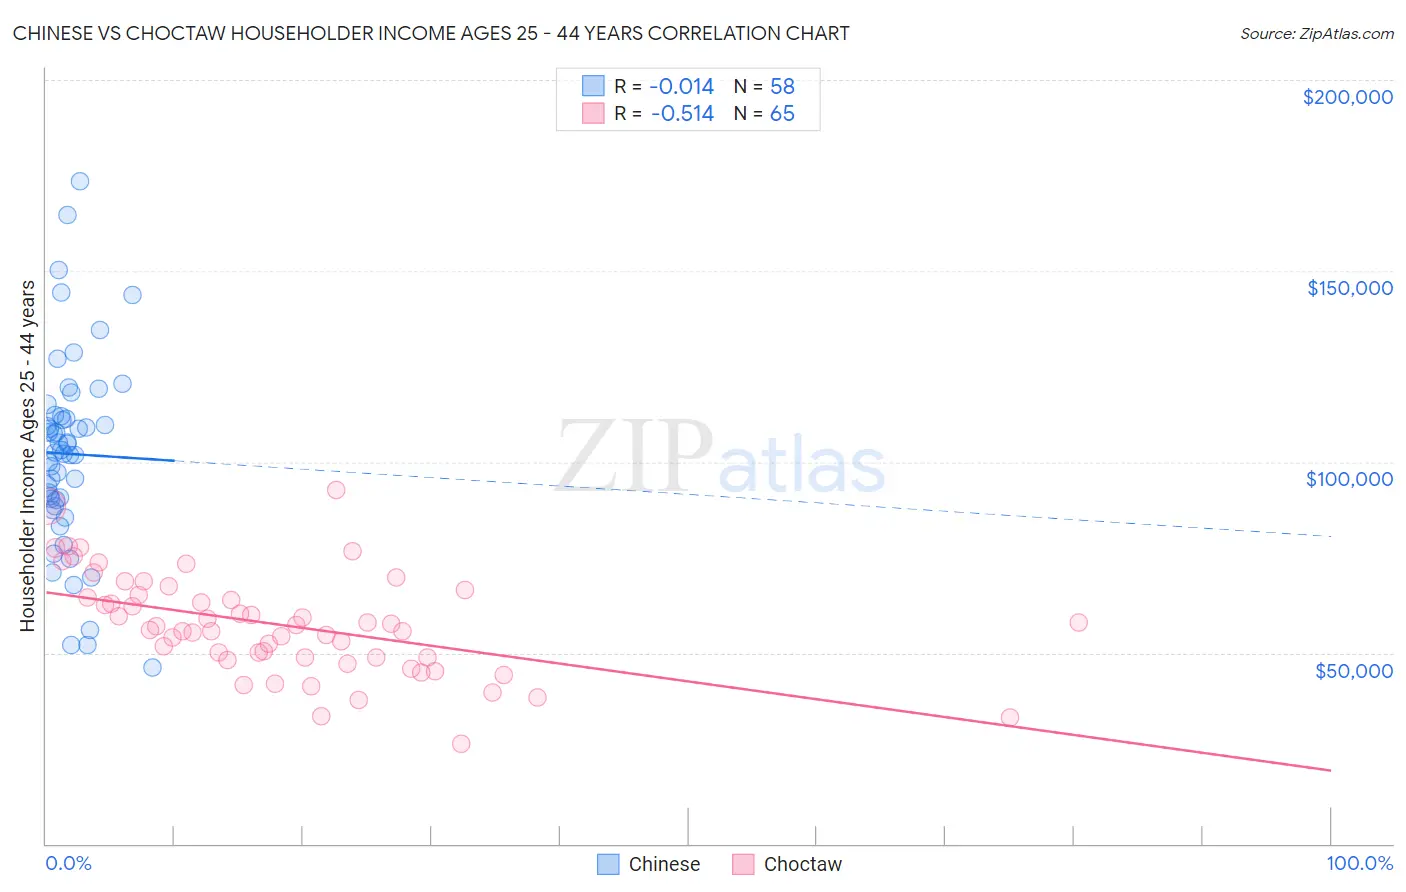 Chinese vs Choctaw Householder Income Ages 25 - 44 years